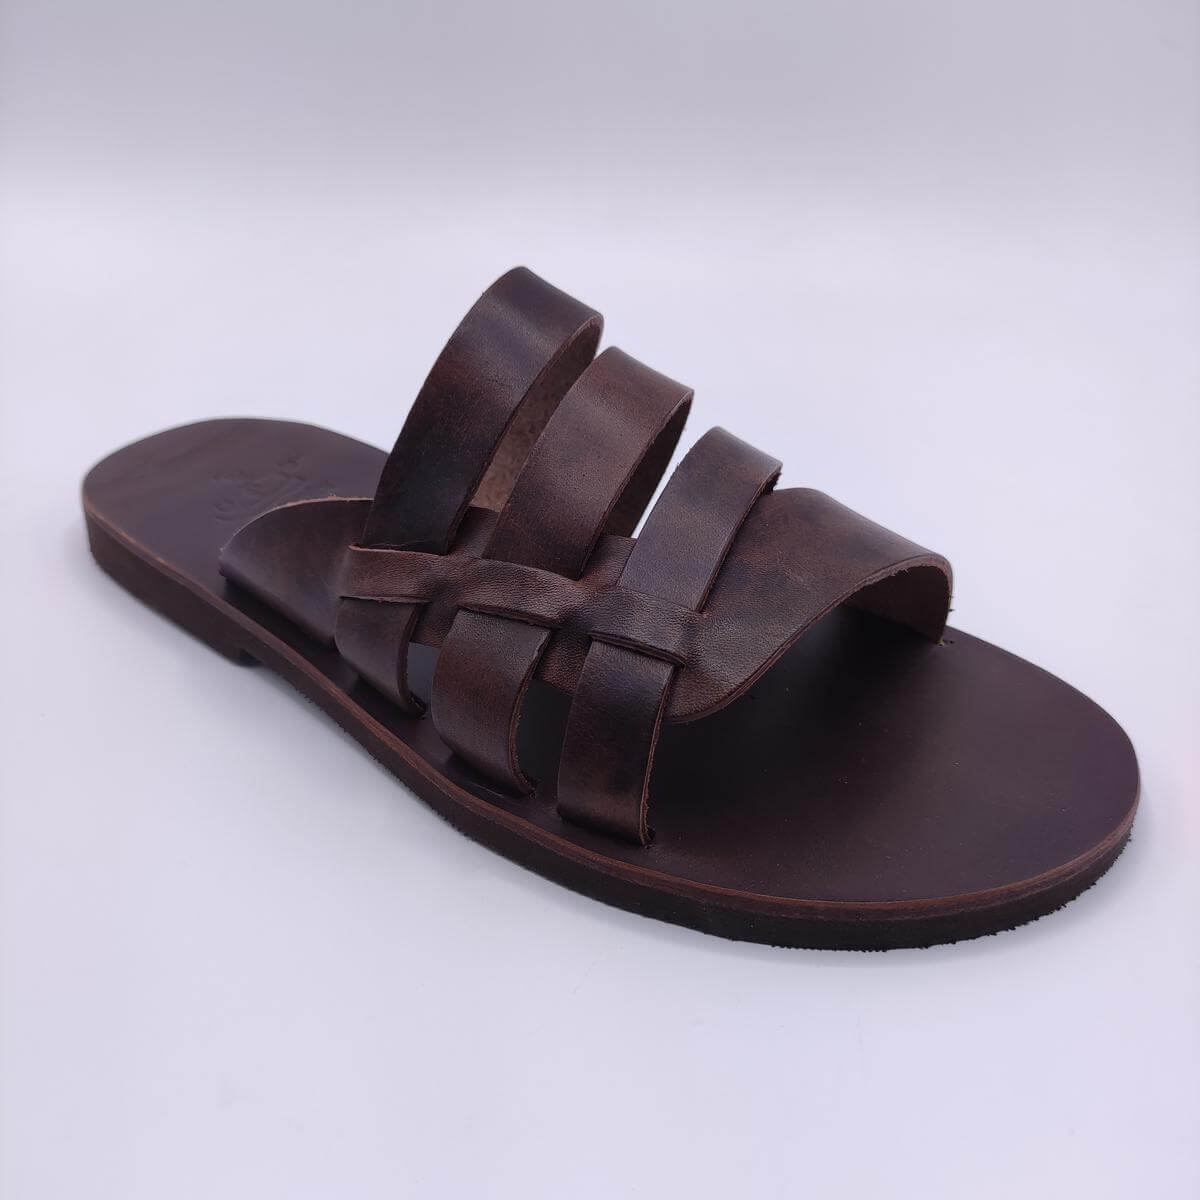 Leather Sandals for Men - Handmade by Pagonis Greek Sandals